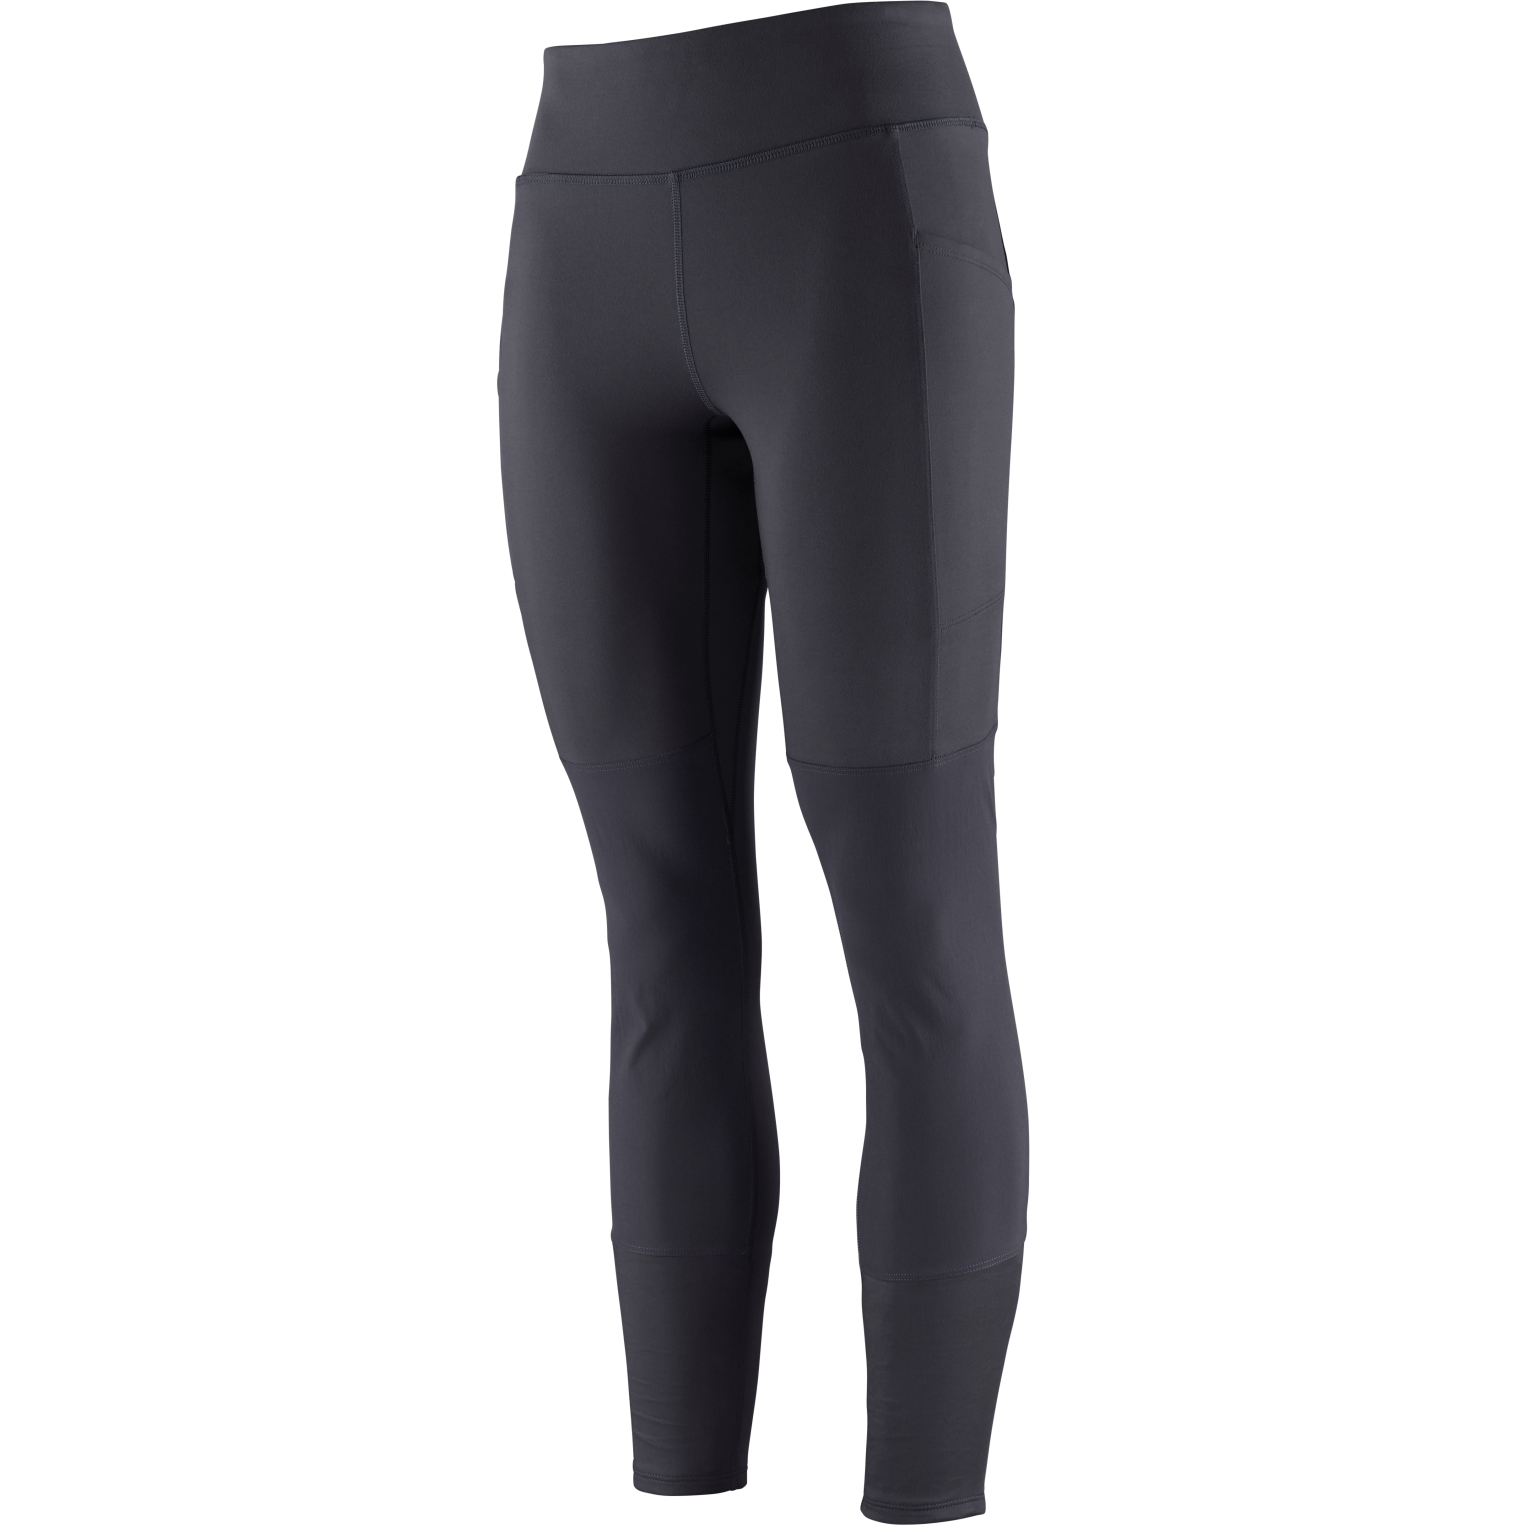 Image of Patagonia Women's Pack Out Hike Tights - Black